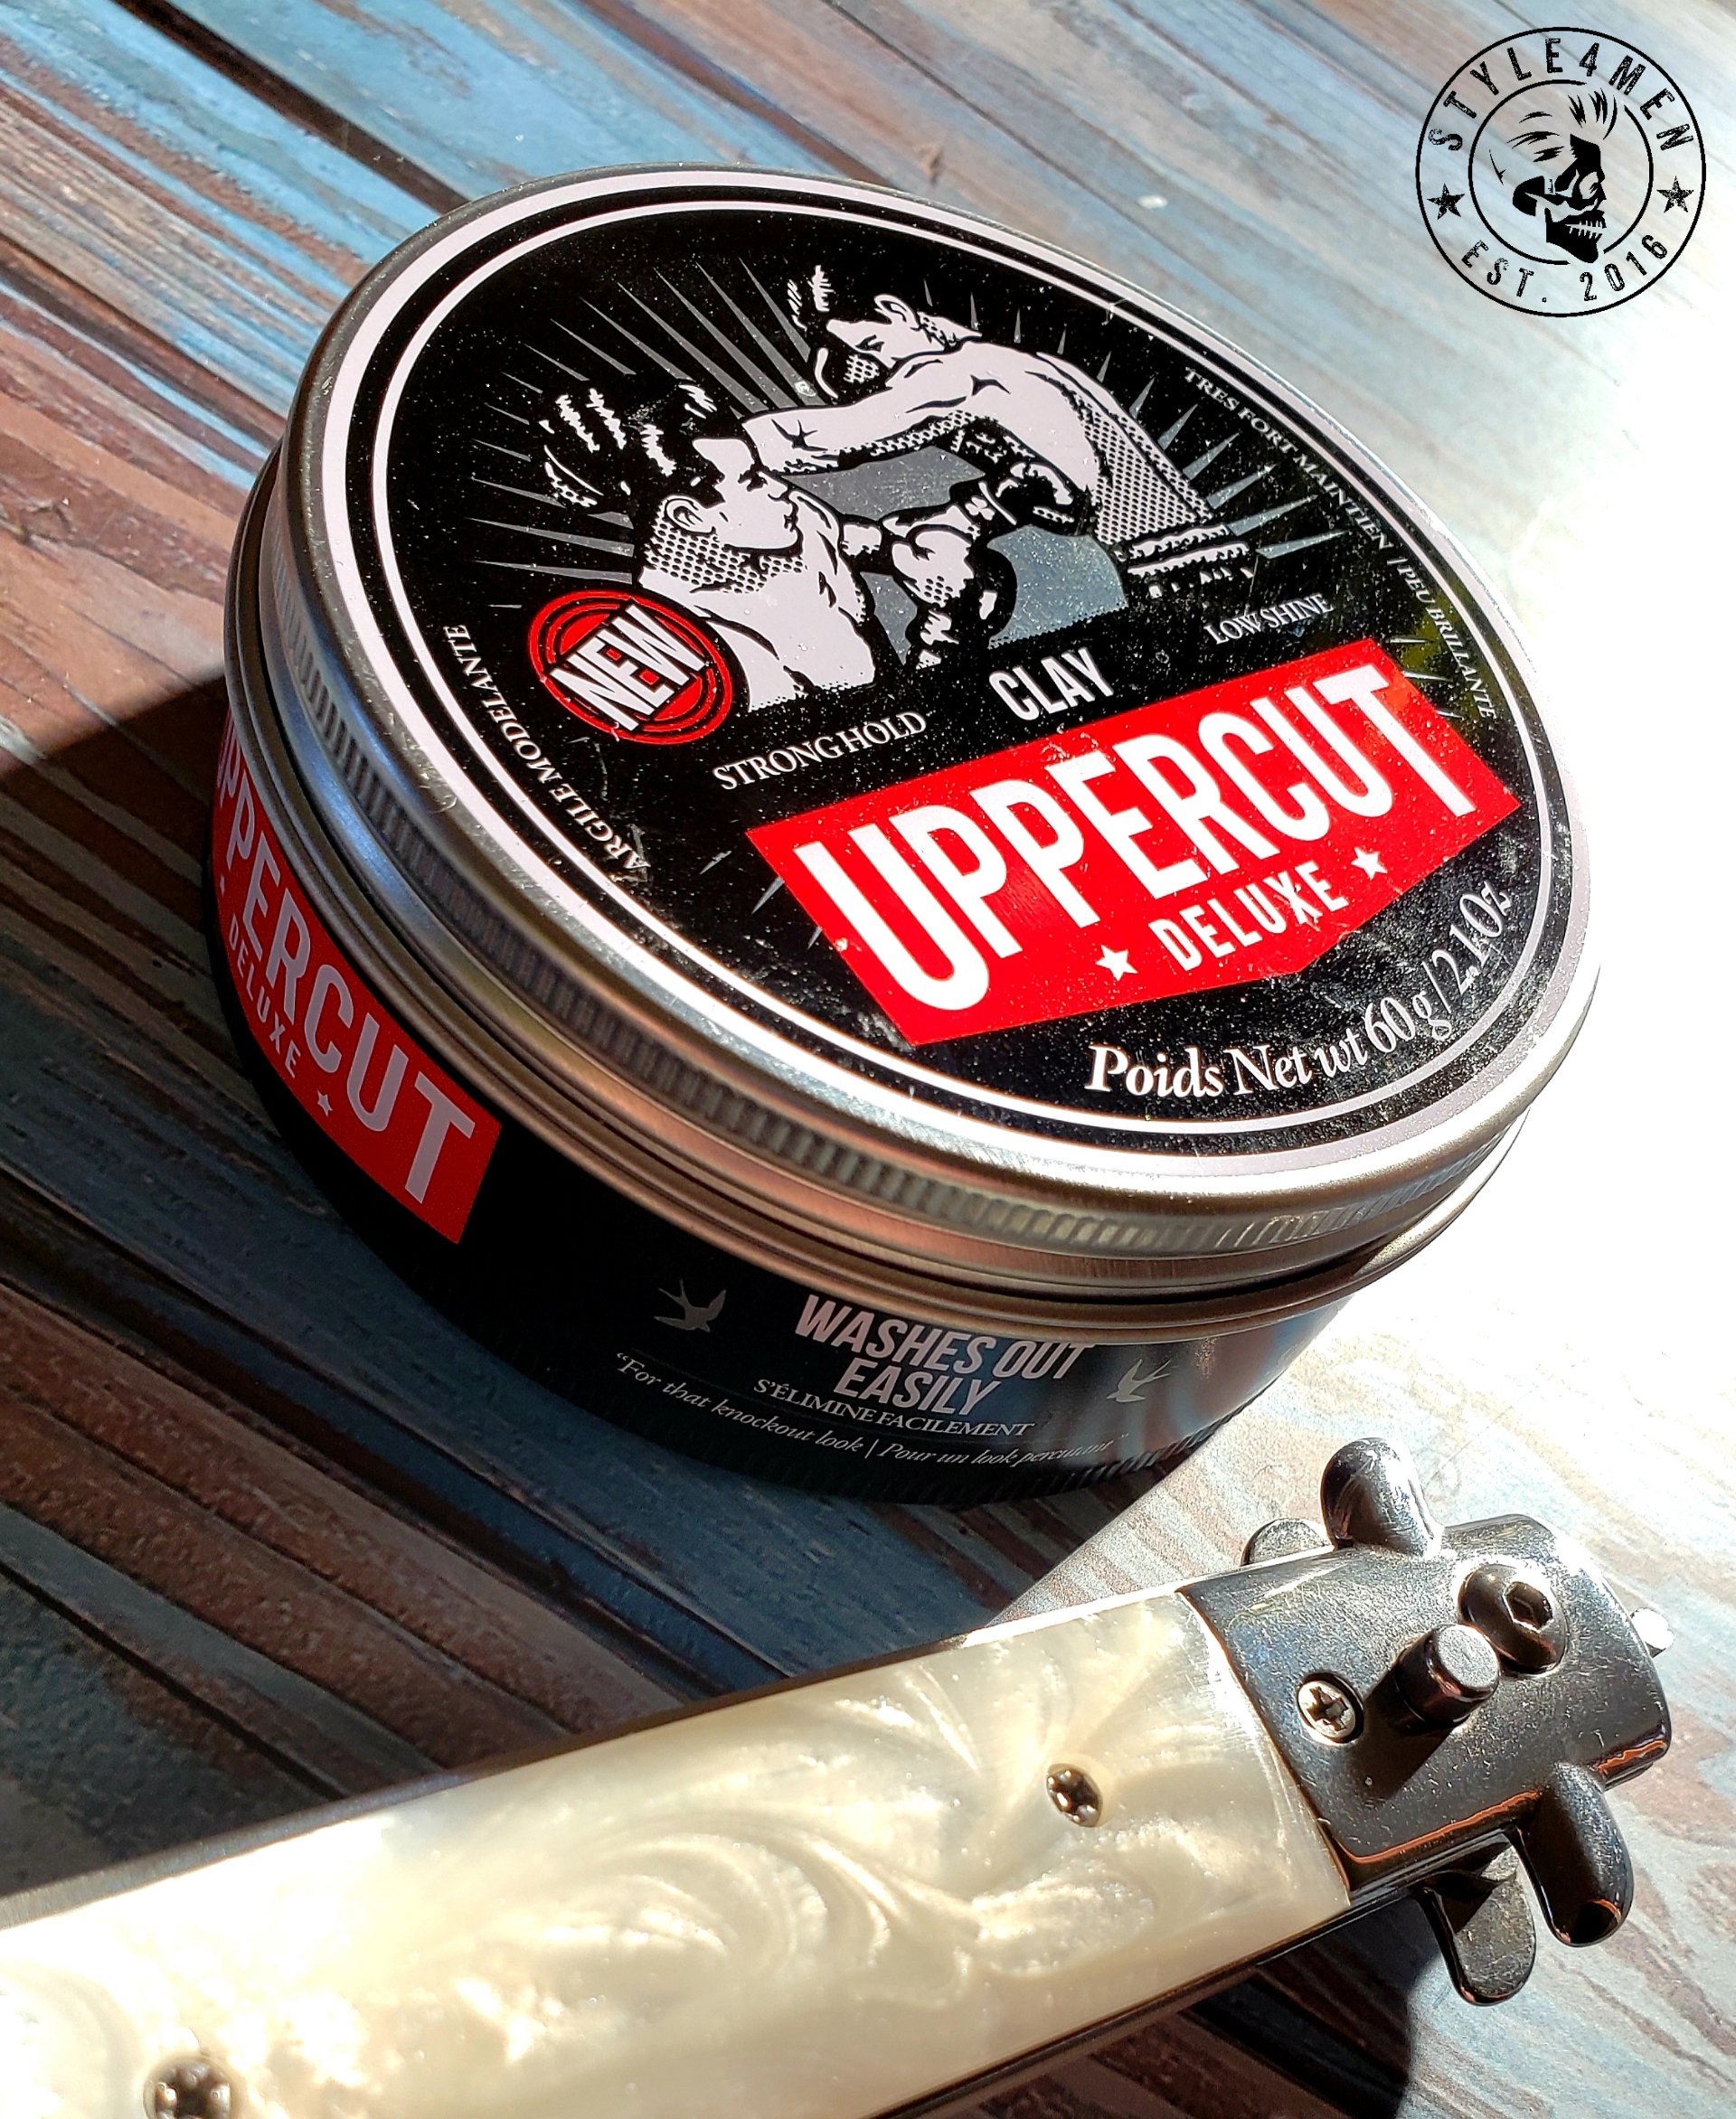 UPPERCUT DELUXE locks everything in place with its strong hold Clay